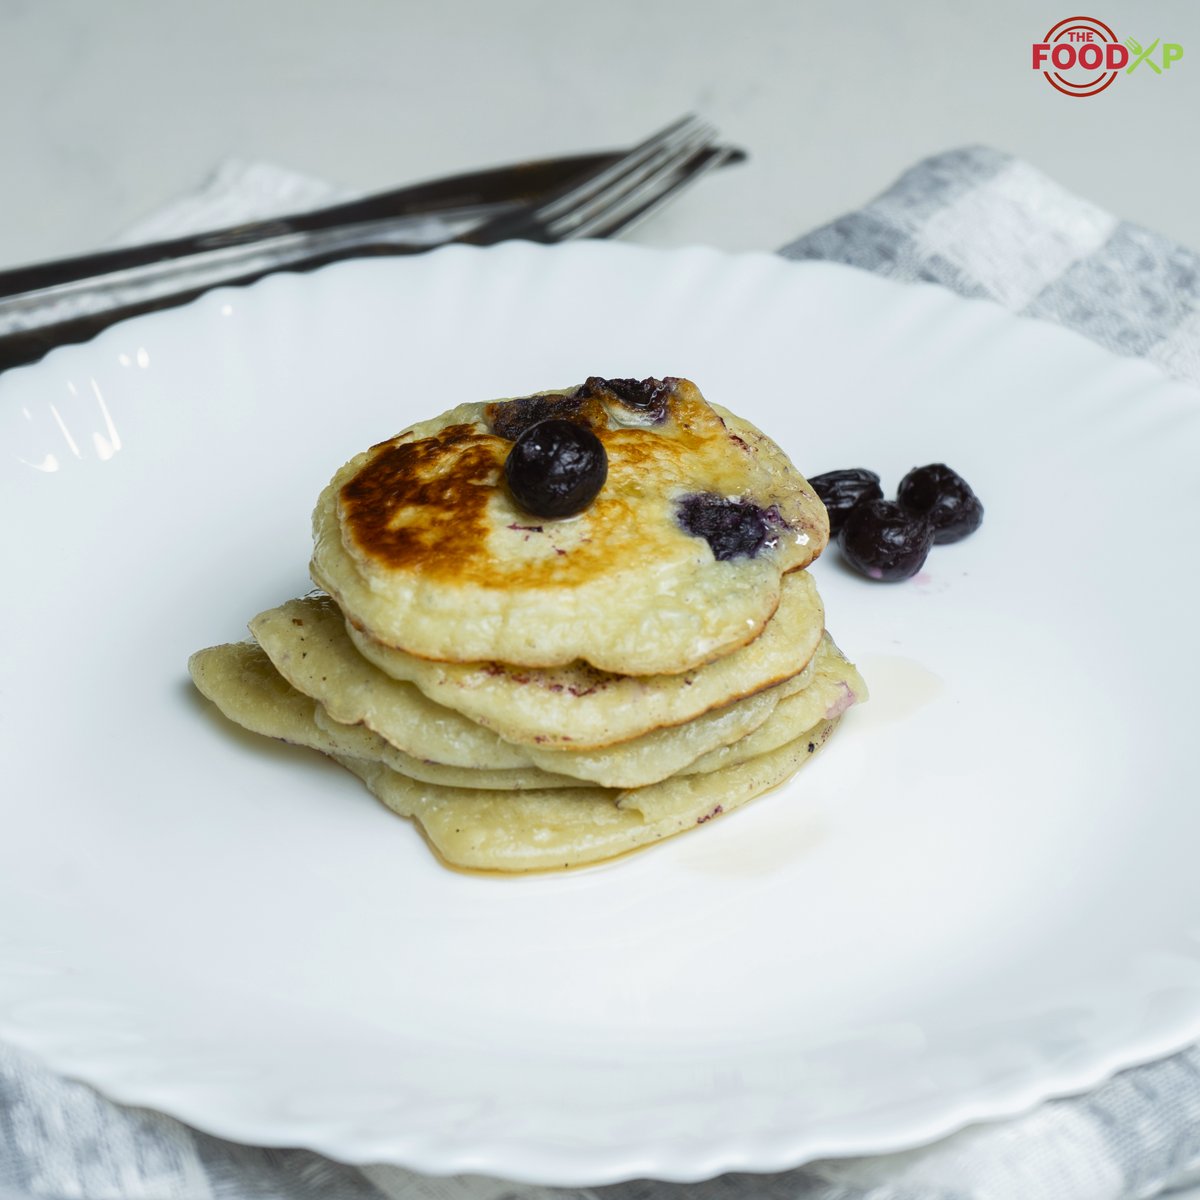 For light and sweet but appetizing breakfast meals, Gordon Ramsay blueberry ricotta pancakes are a perfect option. Video of the recipe coming soon.
#GordonRamsay #Pancakes #Blueberry #Breakfast https://t.co/dPUOJyTQ0W